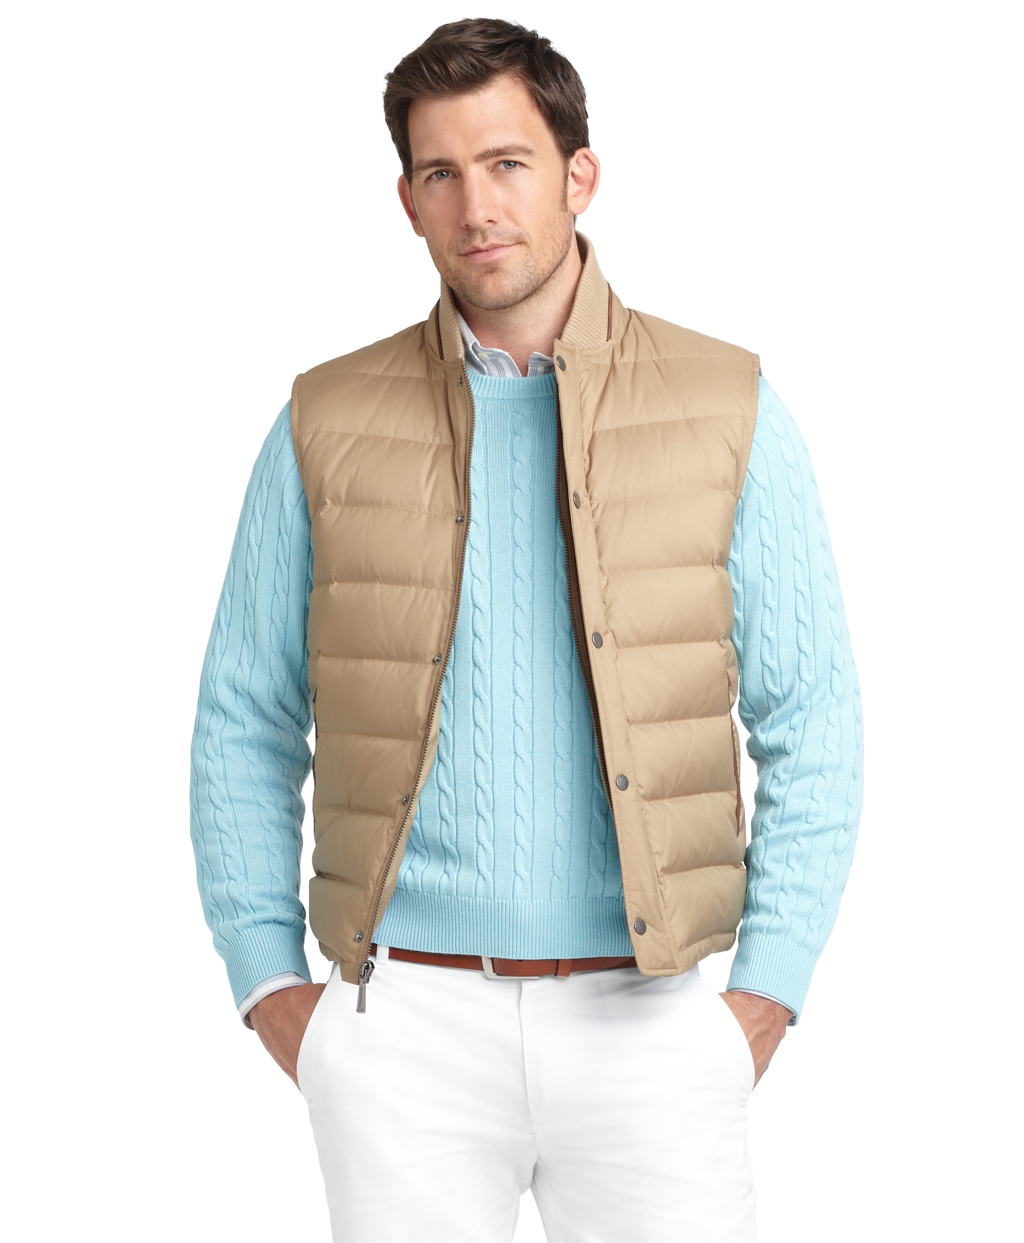 Lyst - Brooks Brothers Mason Quilted Vest in Brown for Men